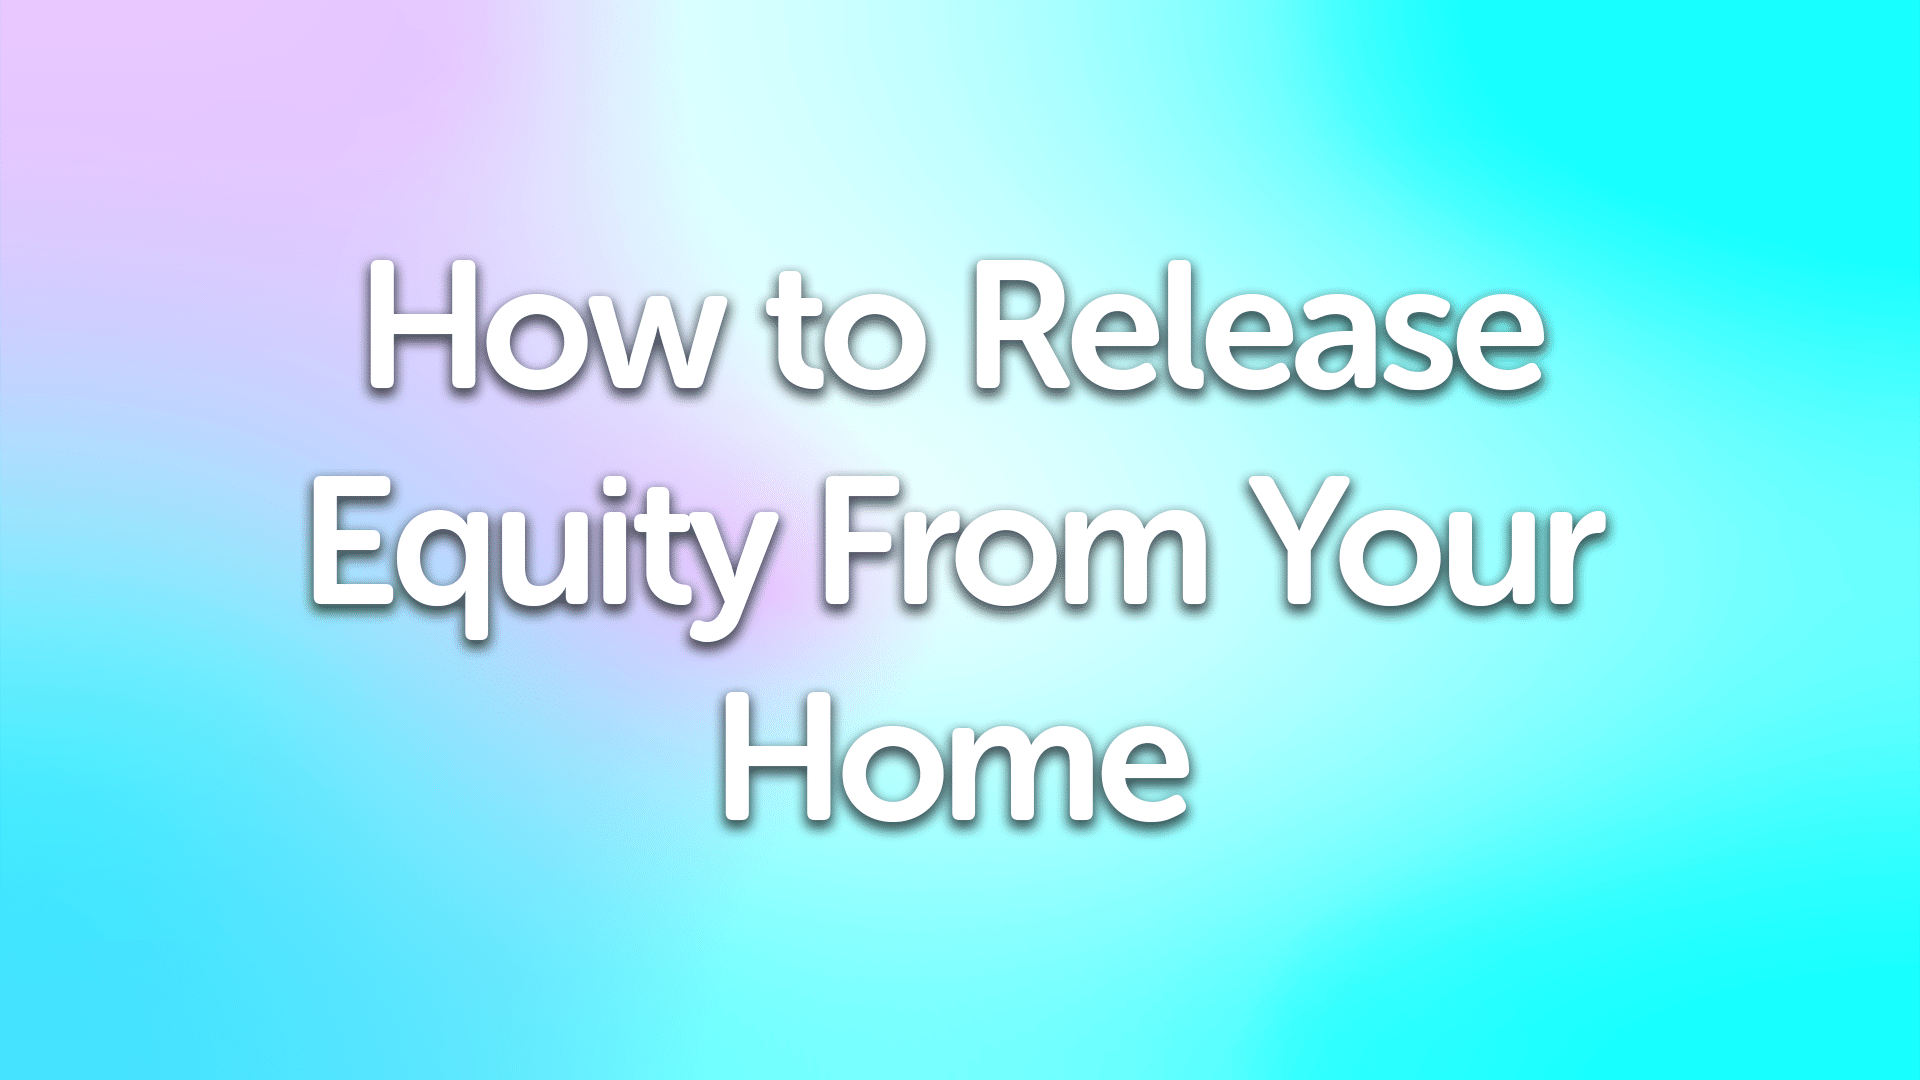 Release Equity From Home